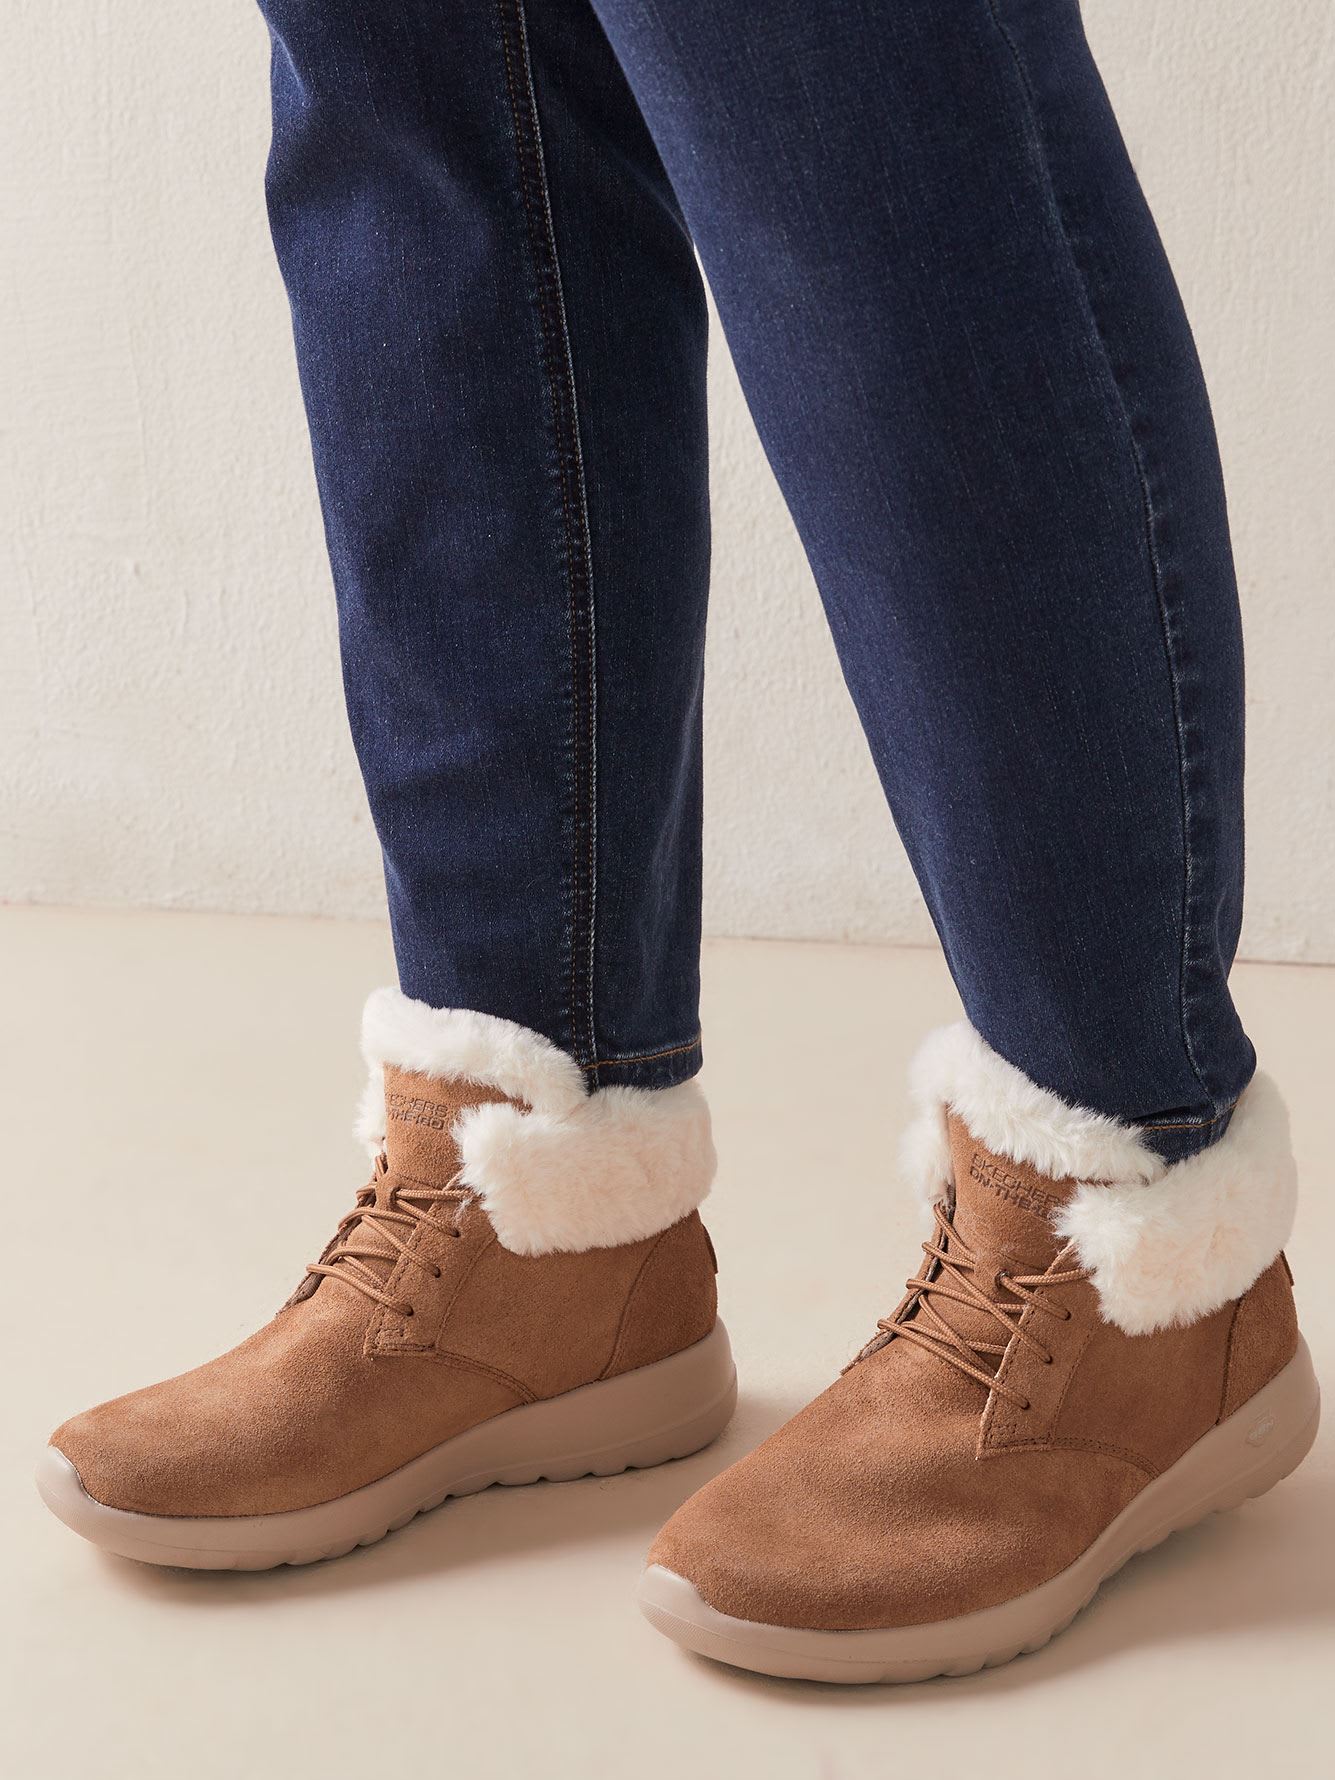 On-The-Go Joy Lush Wide-Width Booties 